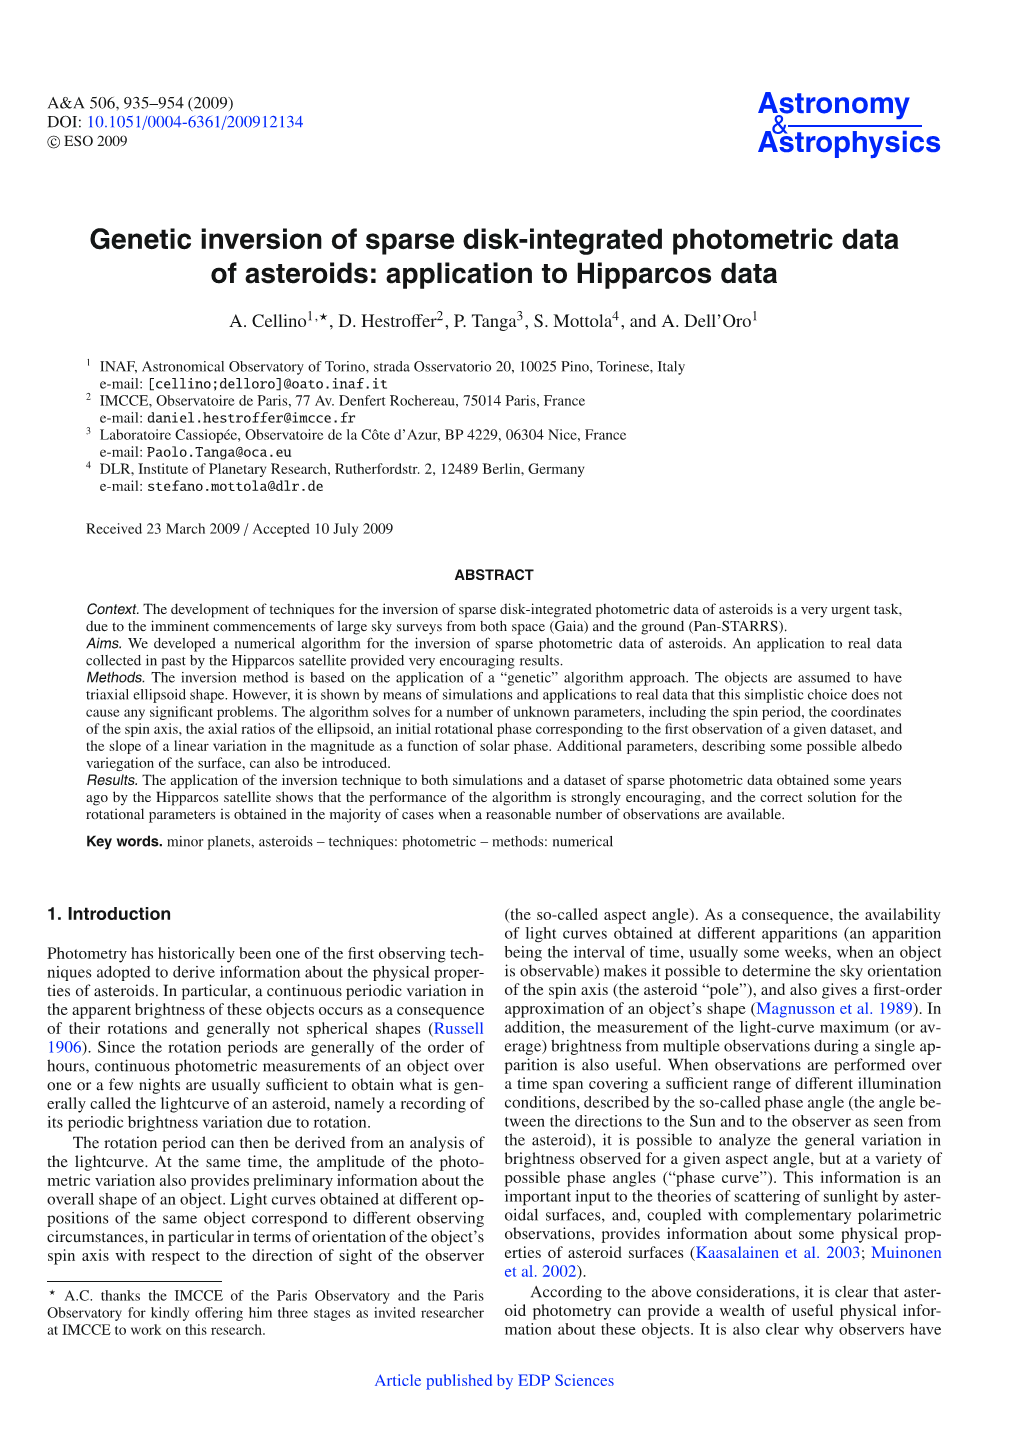 Genetic Inversion of Sparse Disk-Integrated Photometric Data of Asteroids: Application to Hipparcos Data